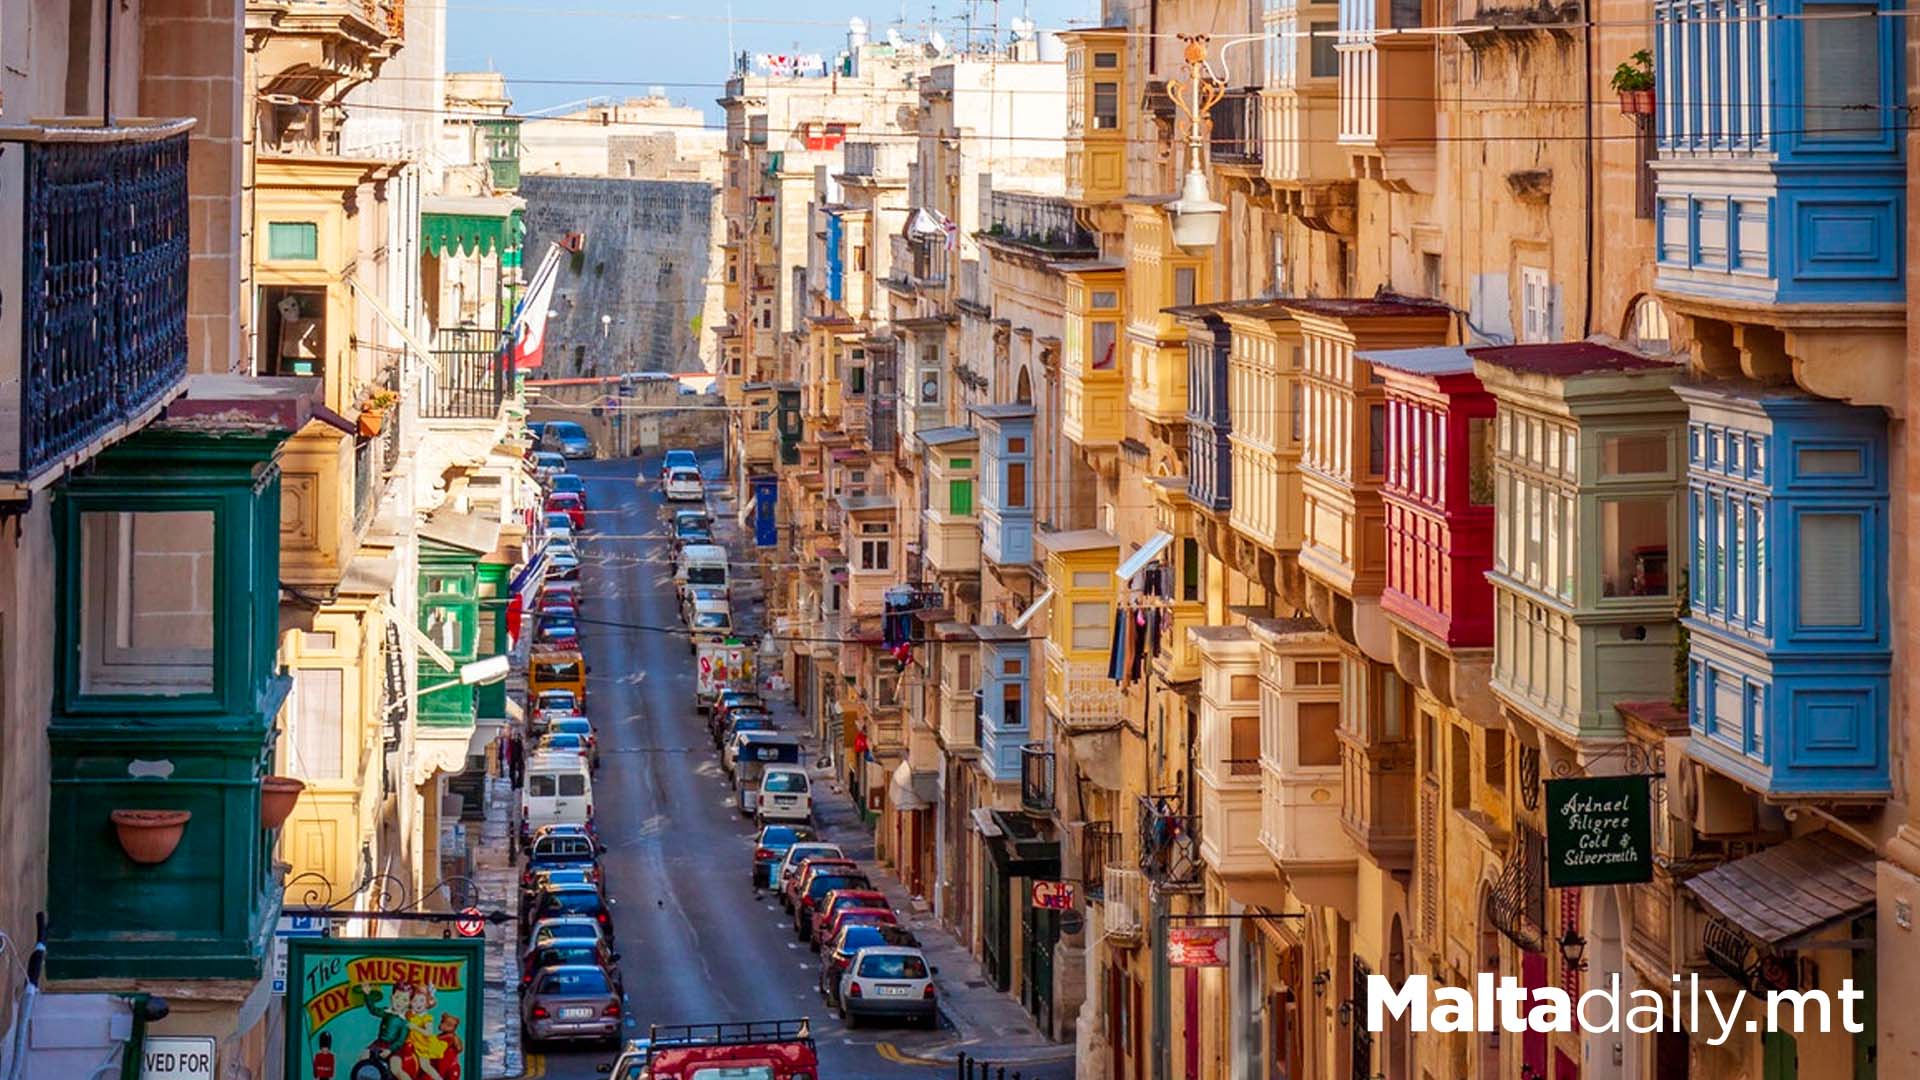 Malta's Population Grew By Over 100,000 From 2011 To 2021